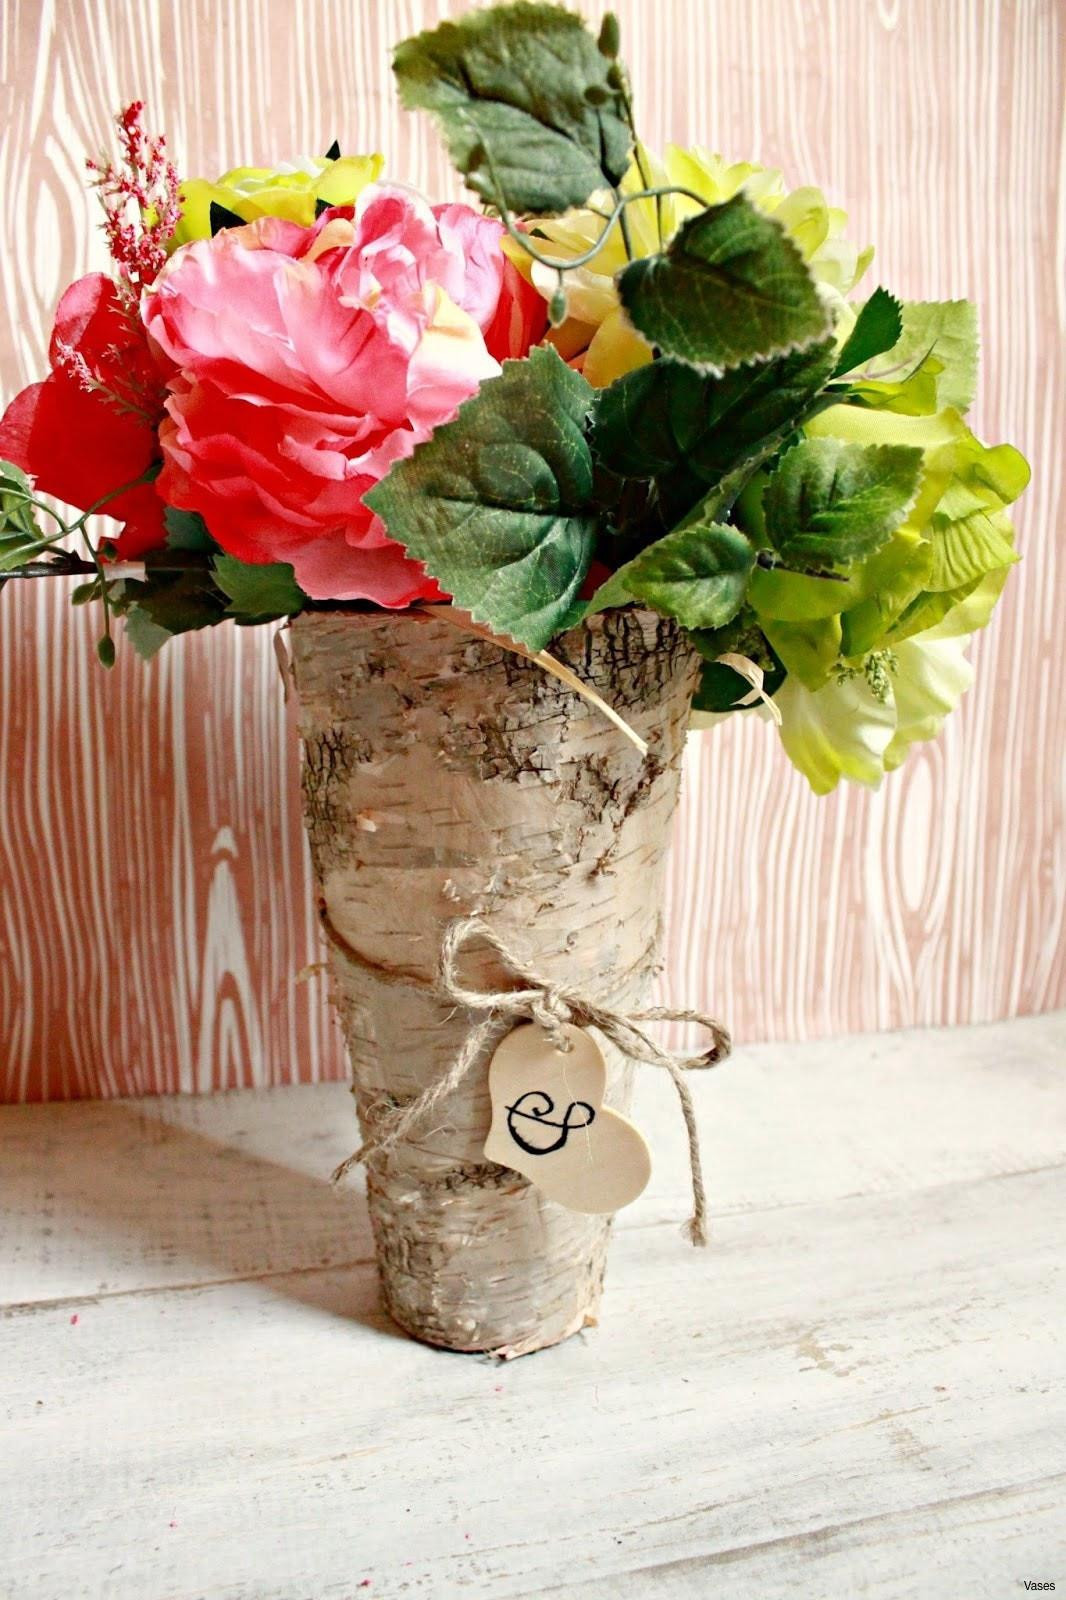 29 Fashionable Small Glass Vases Michaels 2024 free download small glass vases michaels of diy wedding ideas on a budget inspirational concept weddings by pertaining to diy wedding ideas on a budget fresh flowers and decorations for weddings h vases d